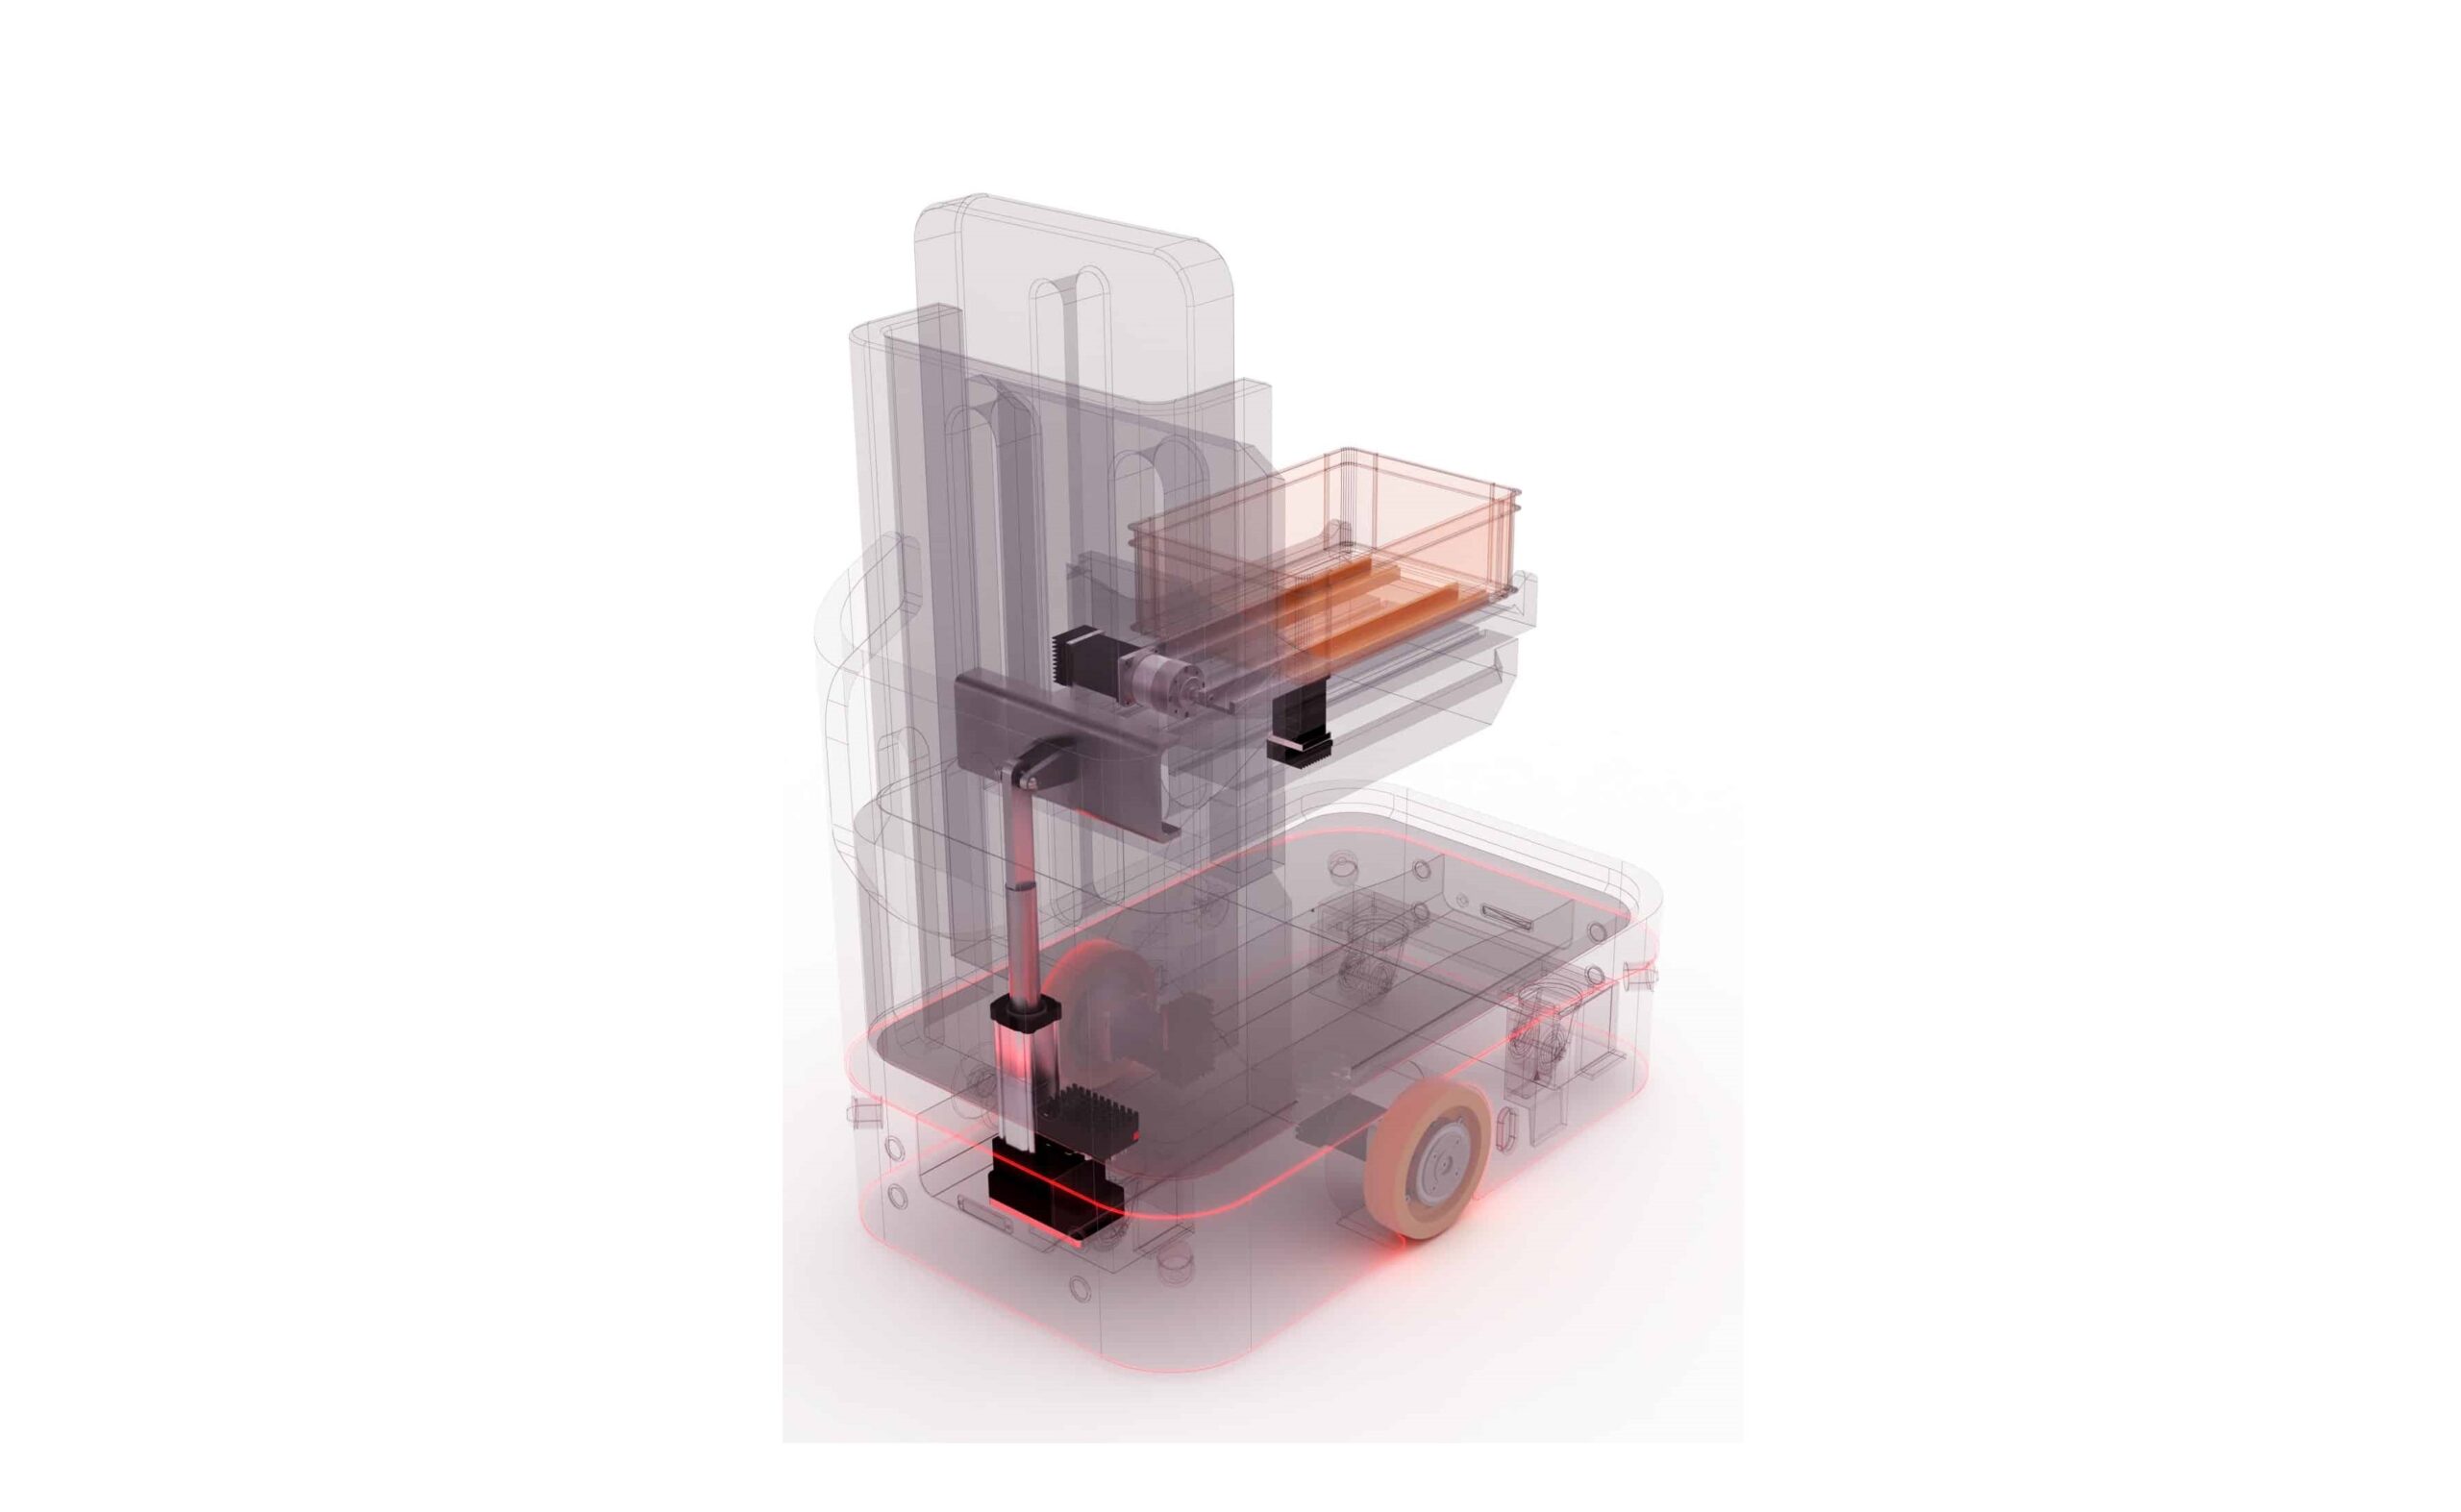 In the field of mobile robotics, STXI covers a diverse range of applications with its decentralized and integrated drive solutions. – Image: STXI Motion Ltd.